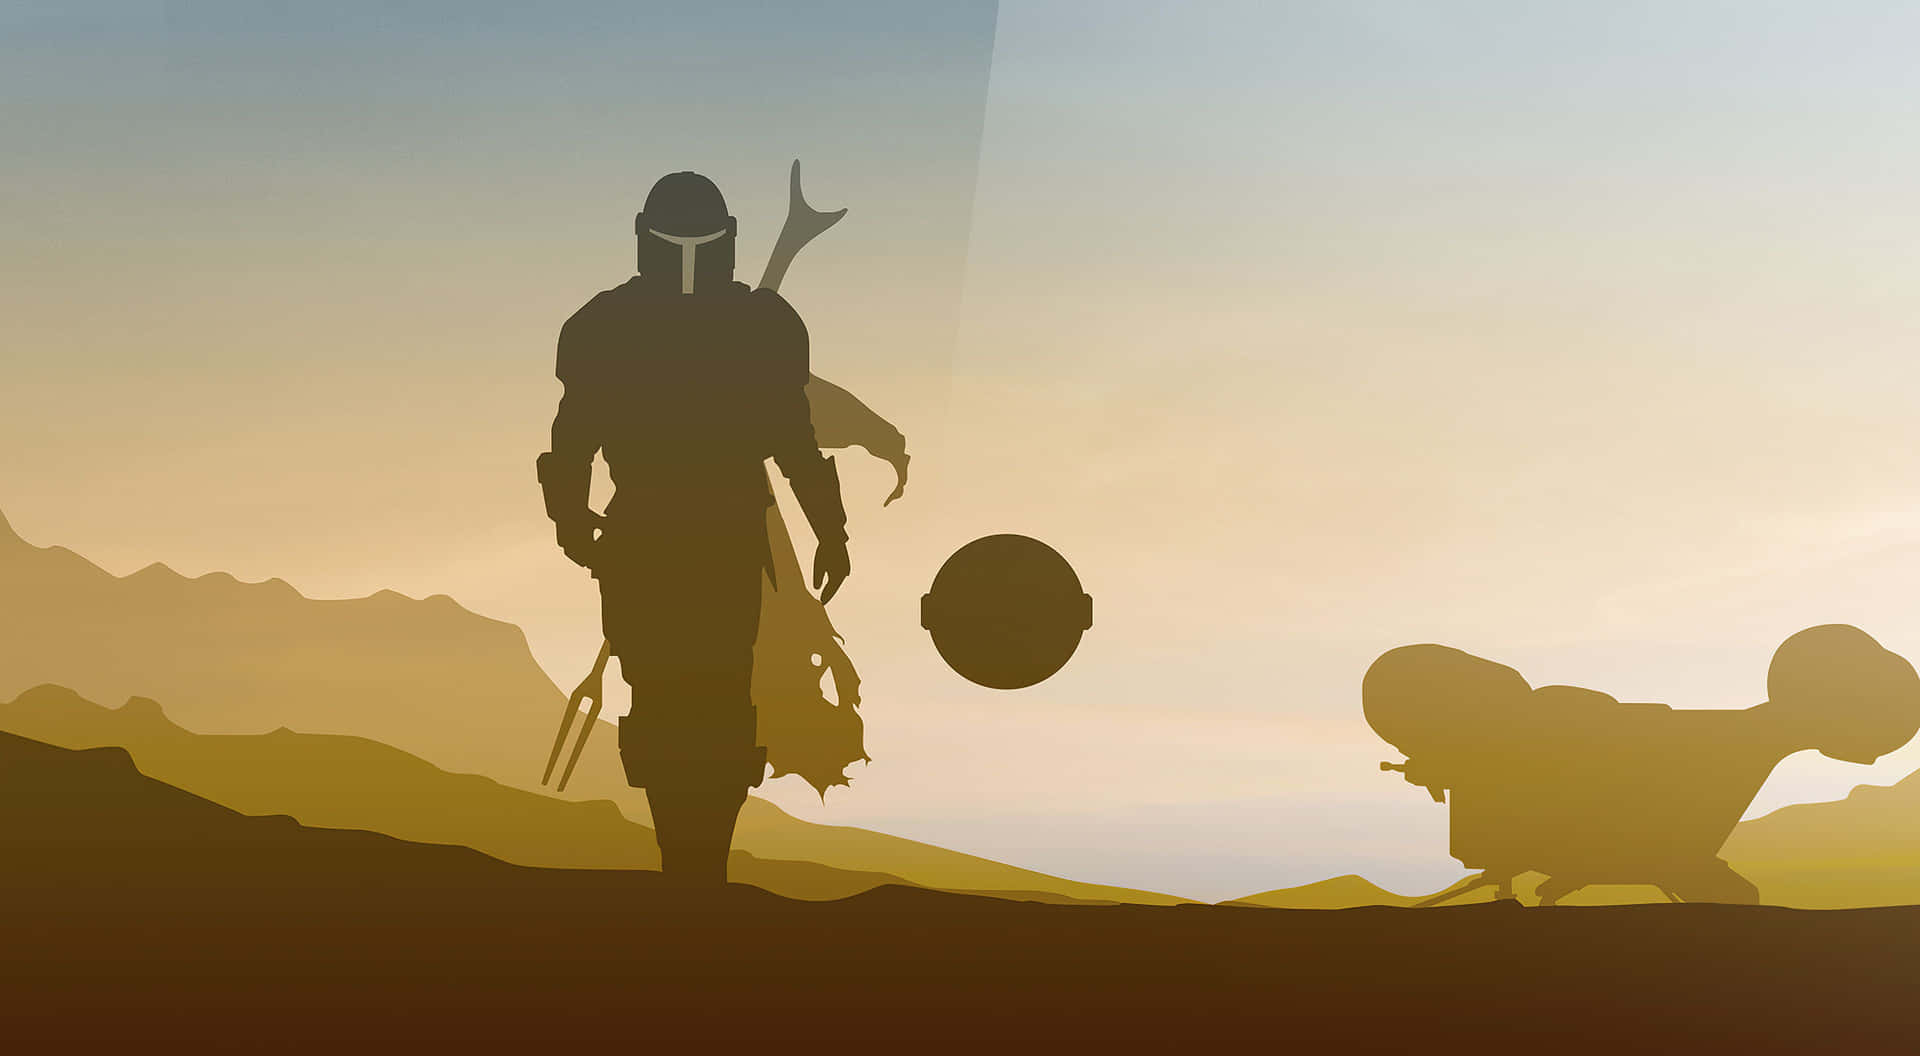 "The Mandalorian and the Child are Ready for Adventure"